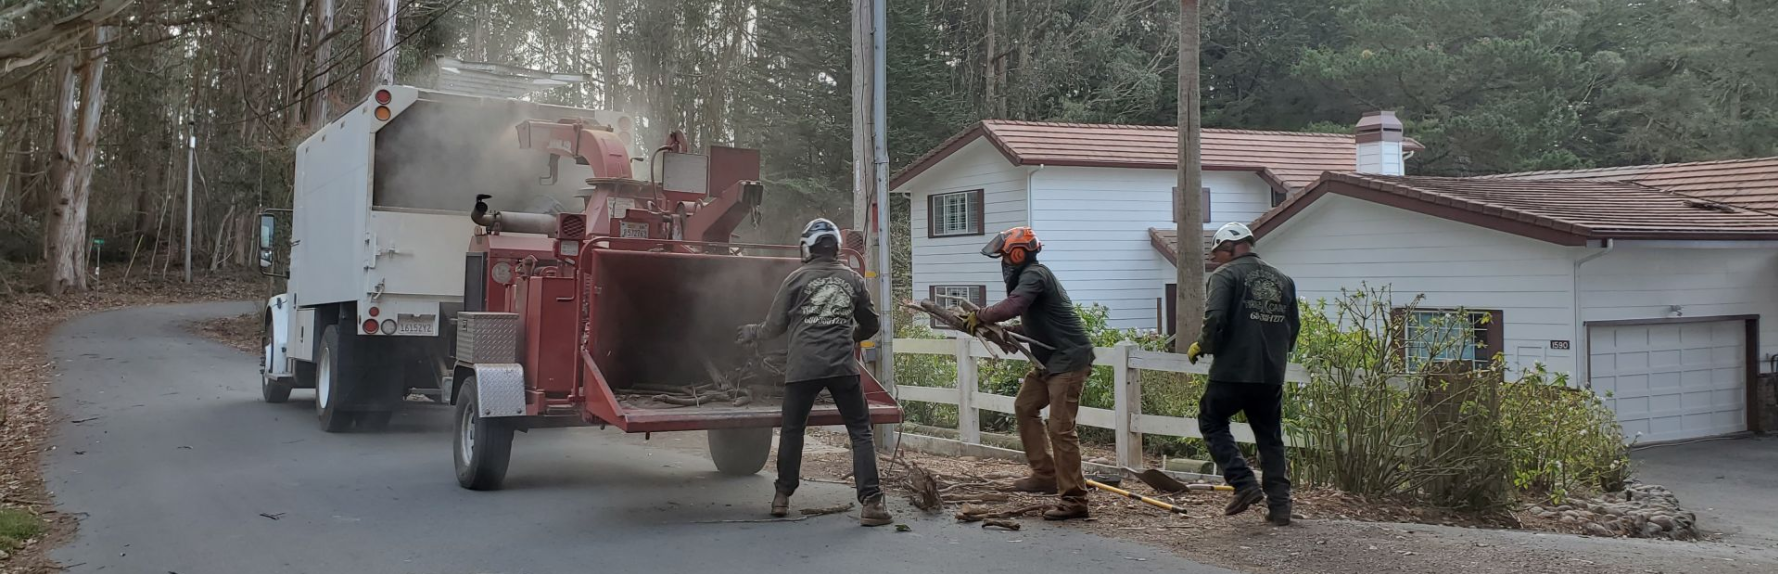 Photo shows a street and 3 people feeding wood into a wood chipper. There's a white house and trees in the background.